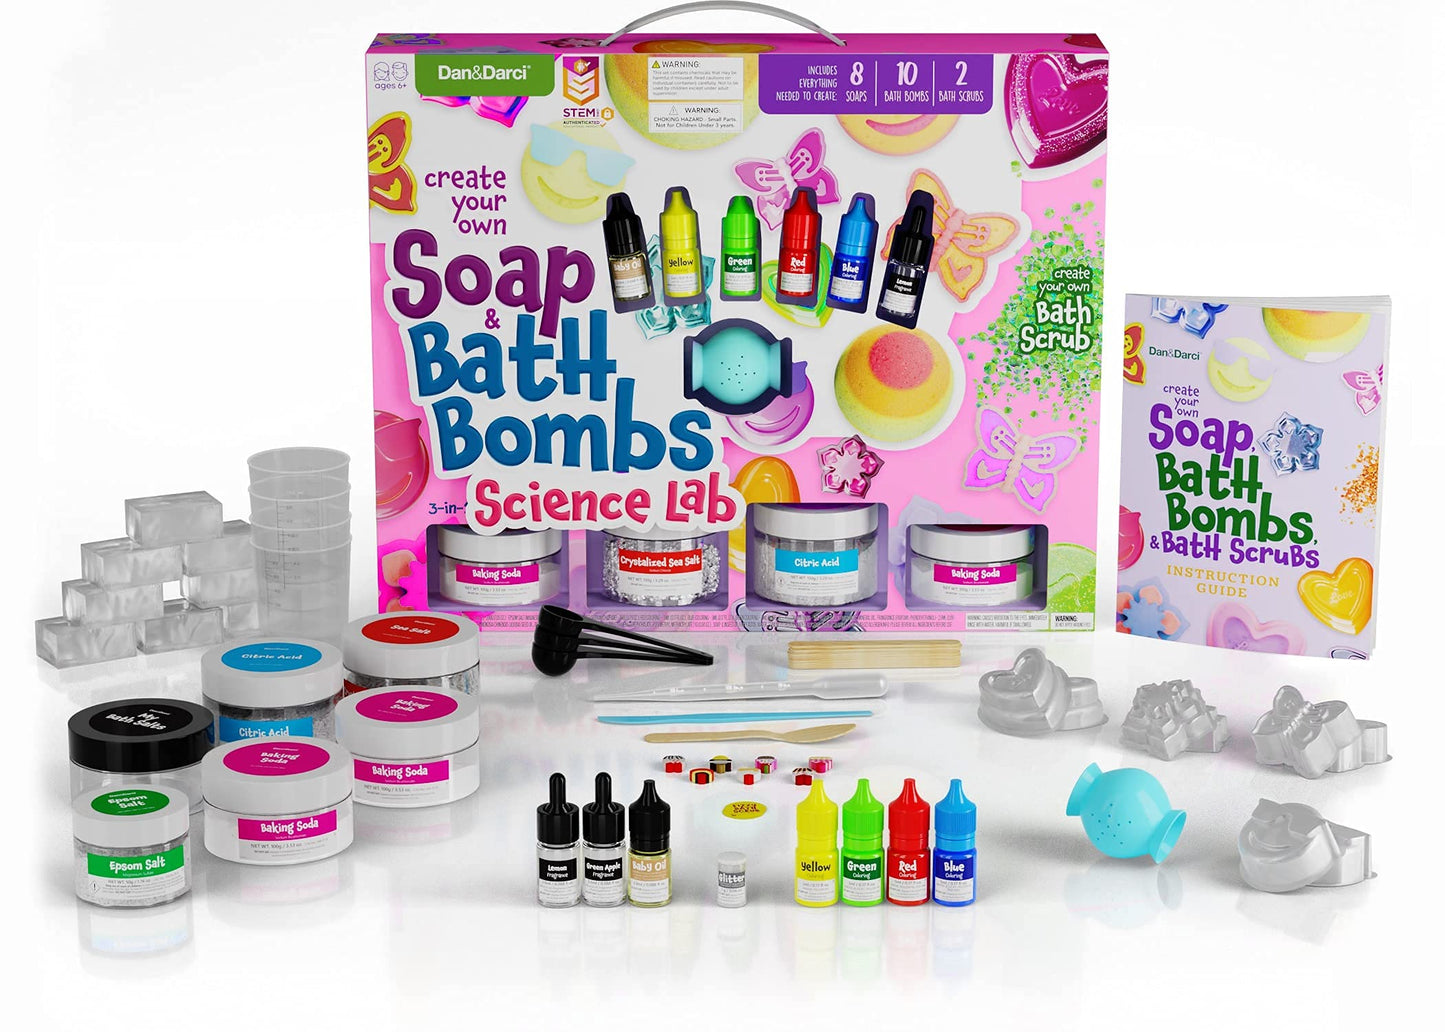 Soap & Bath Bomb Making Kit for Kids, 3-in-1 Spa Science Kit, Craft Gifts for Girls & Boys Age 6, 7, 8, 9, 10-12 Year Old Girl Crafts Kits : DIY